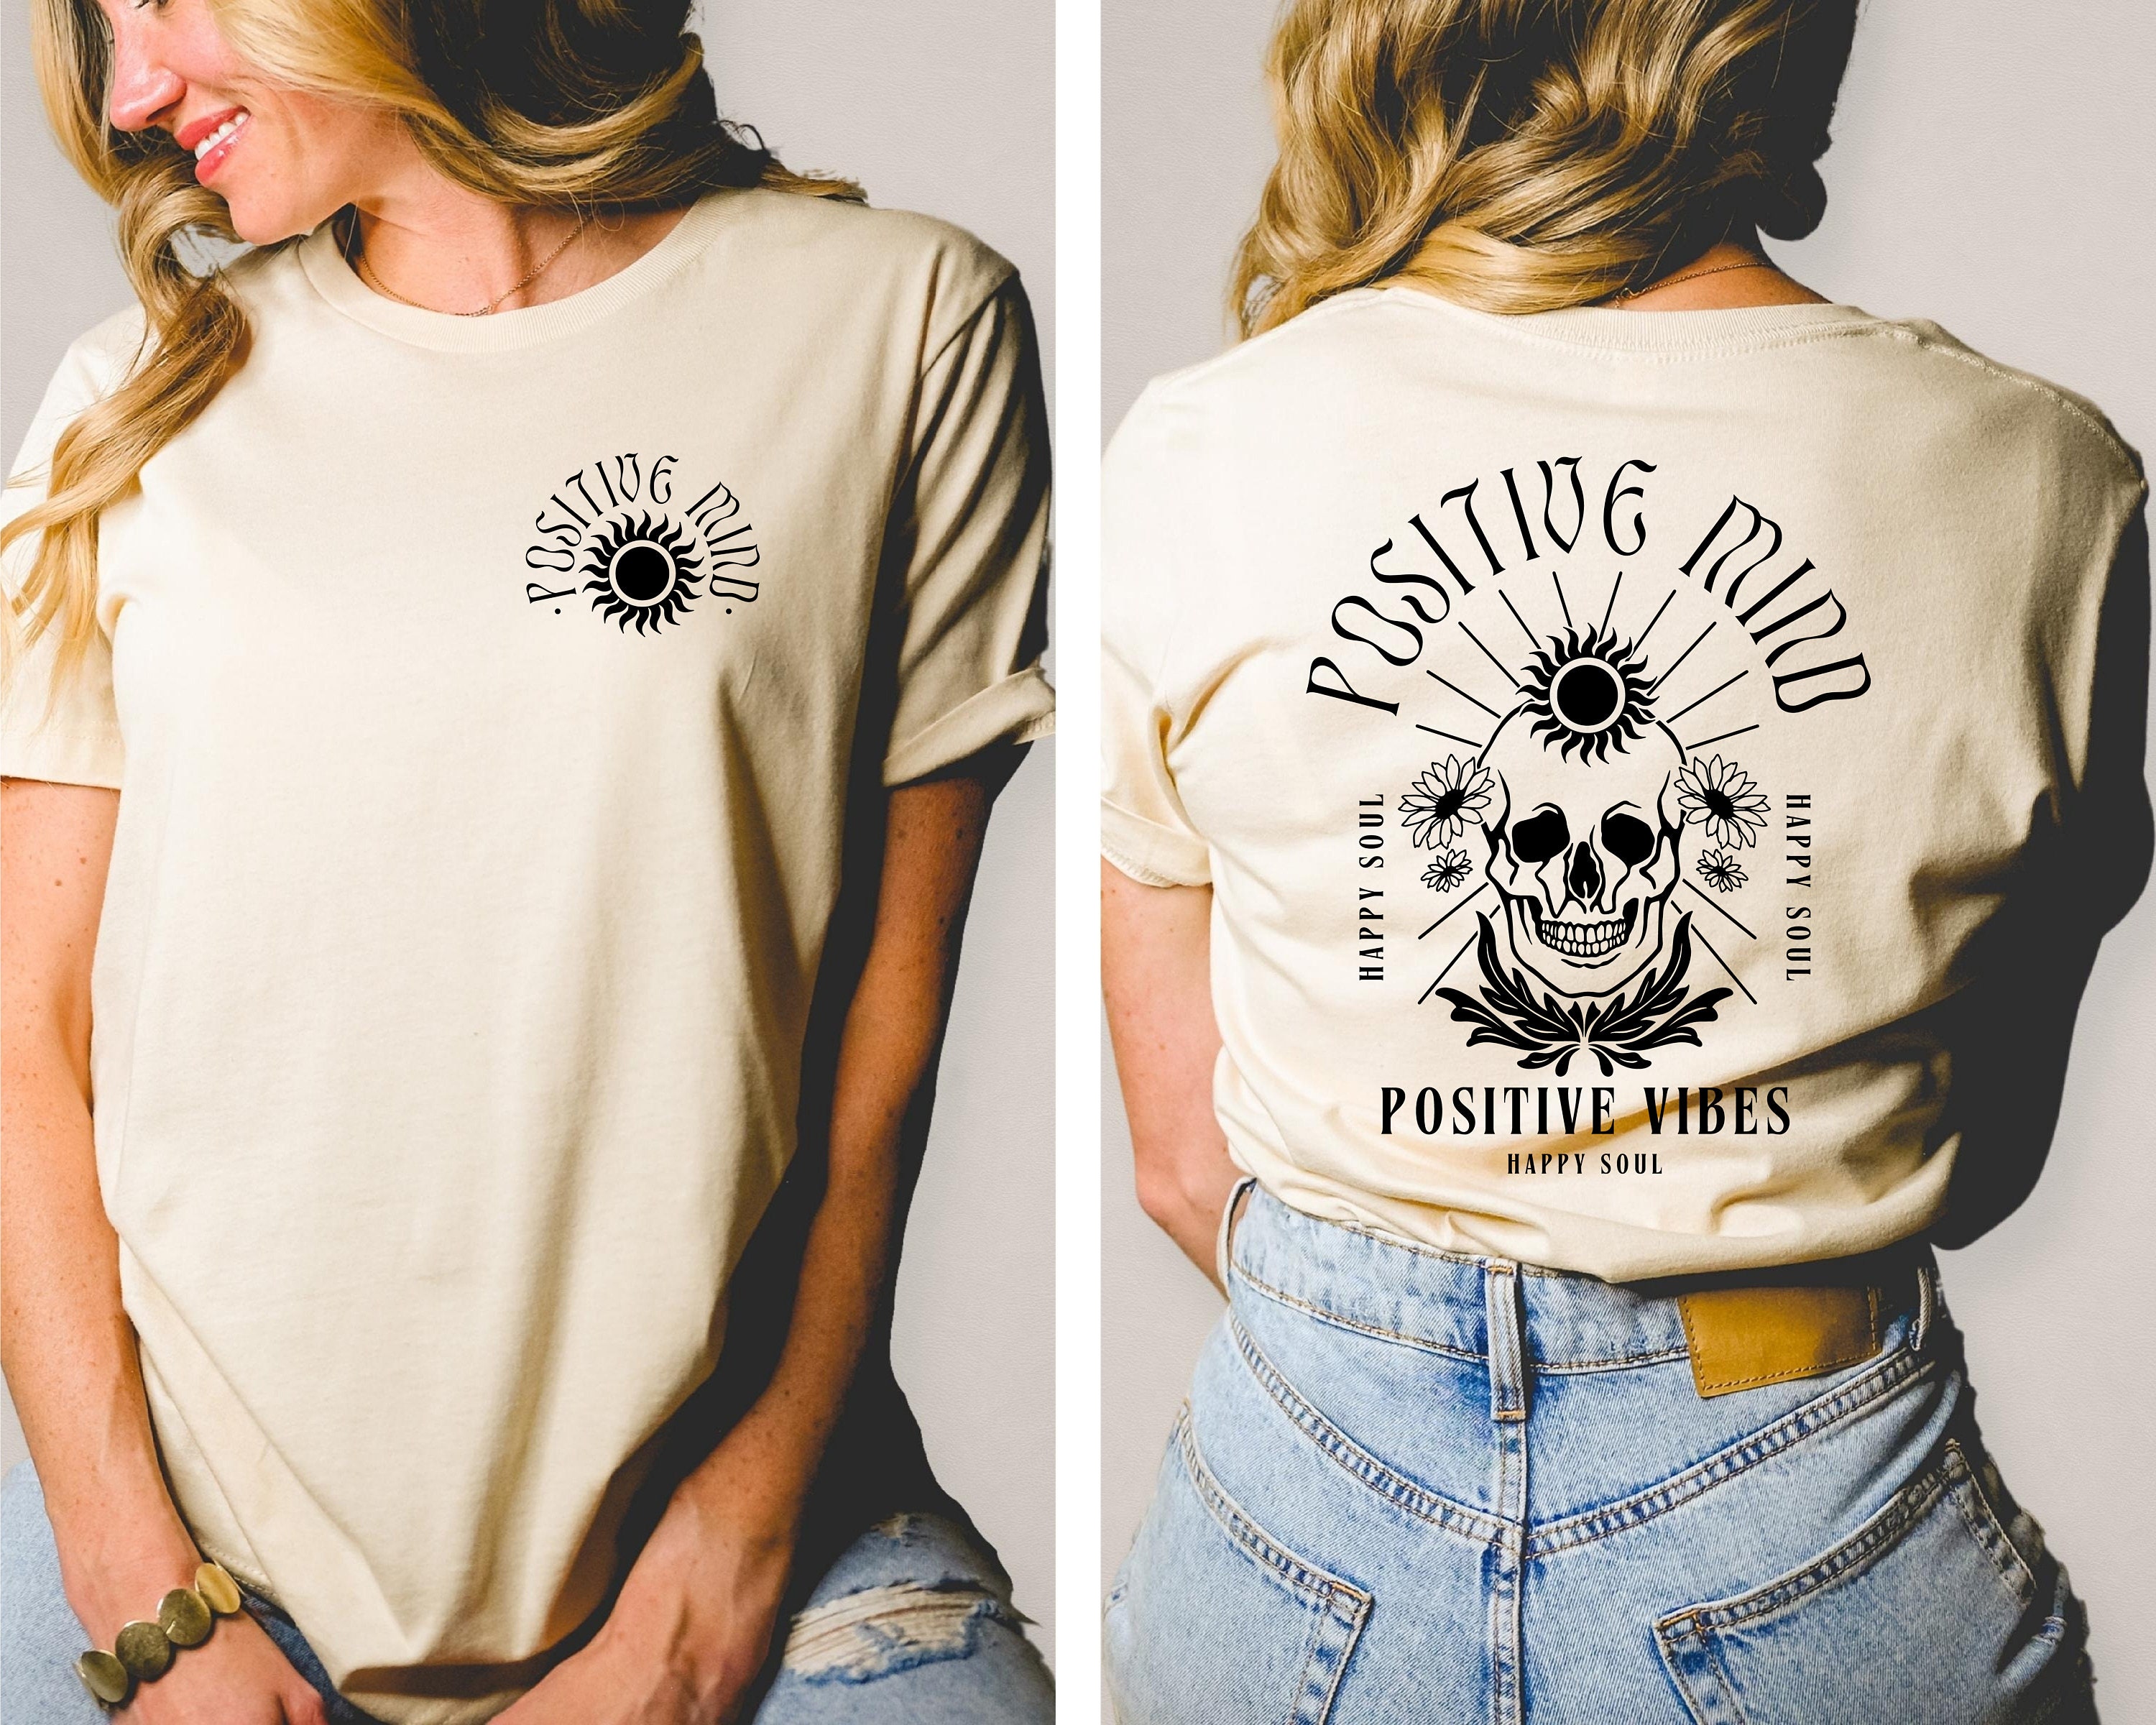 Discover Funny Stay Positive Shirt, Funny Skeleton Shirt, Stay Positive Skull Shirt, Funny Saying Skull Shirt, Positive Vibes Shirt, Motivational Tee